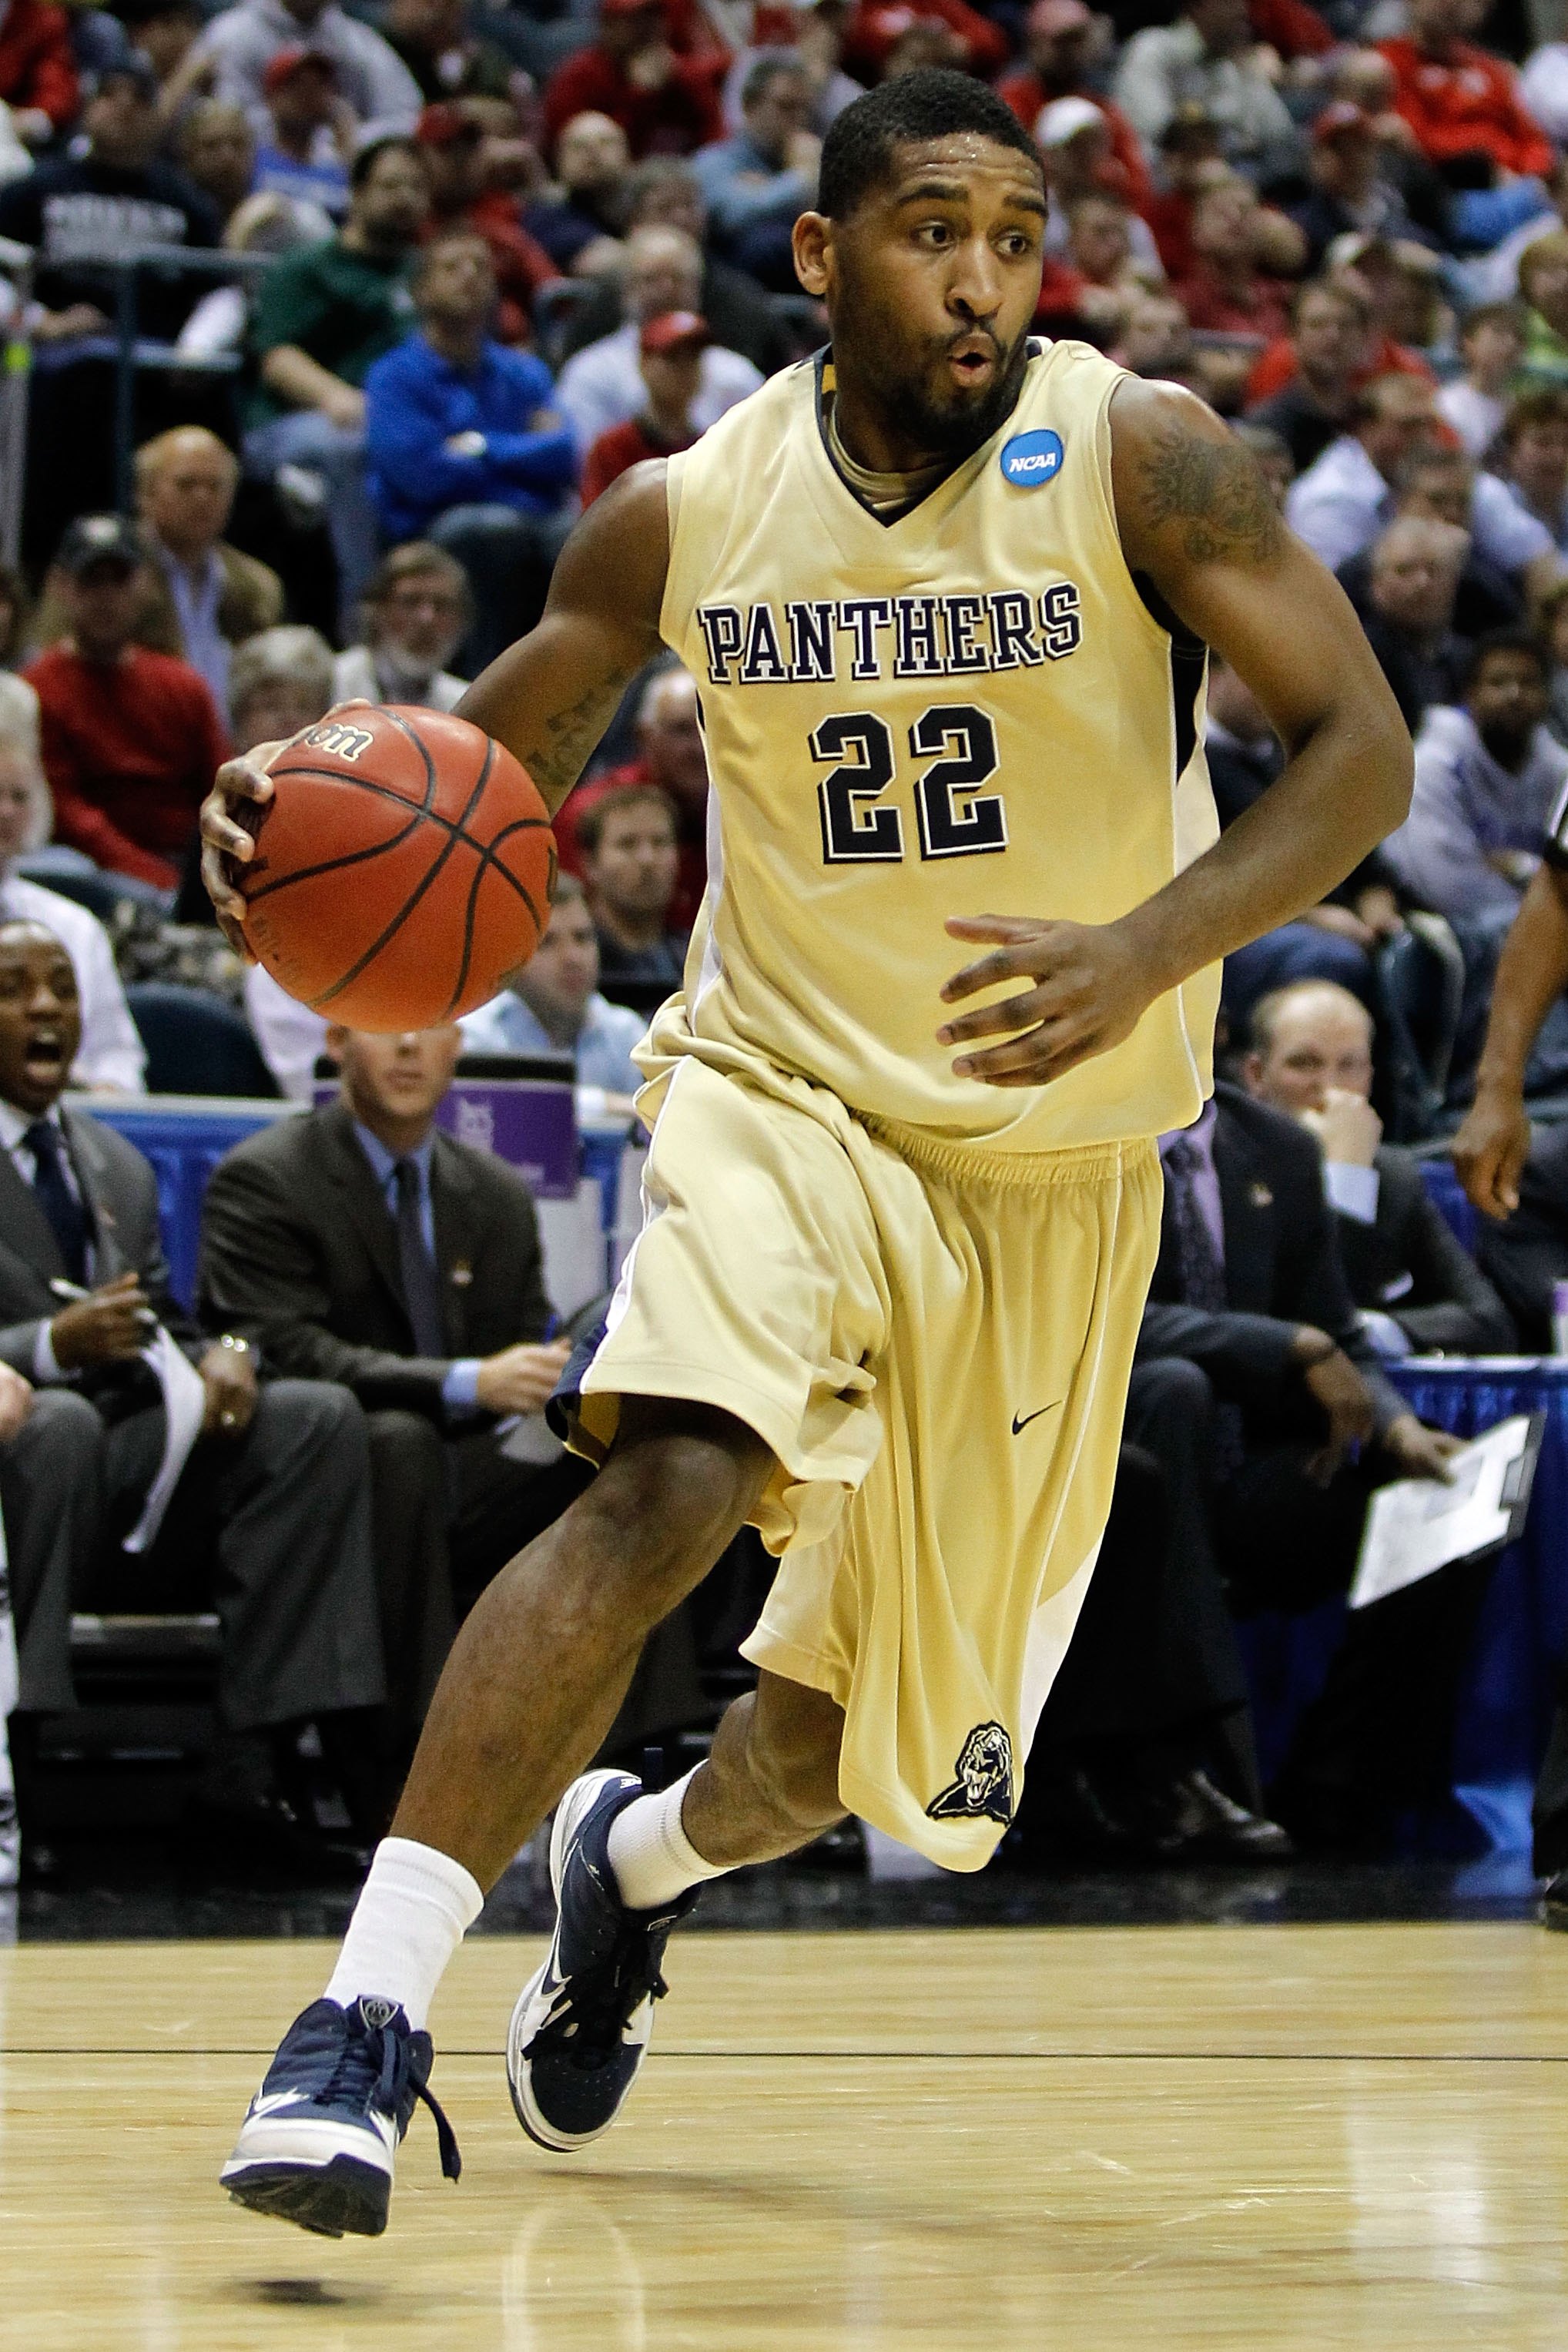 MILWAUKEE - MARCH 21:  Brad Wanamaker #22 of the Pittsburgh Panthers moves the ball against the Xavier Musketeers during the second round of the 2010 NCAA men's basketball tournament at the Bradley Center on March 21, 2010 in Milwaukee, Wisconsin.  (Photo